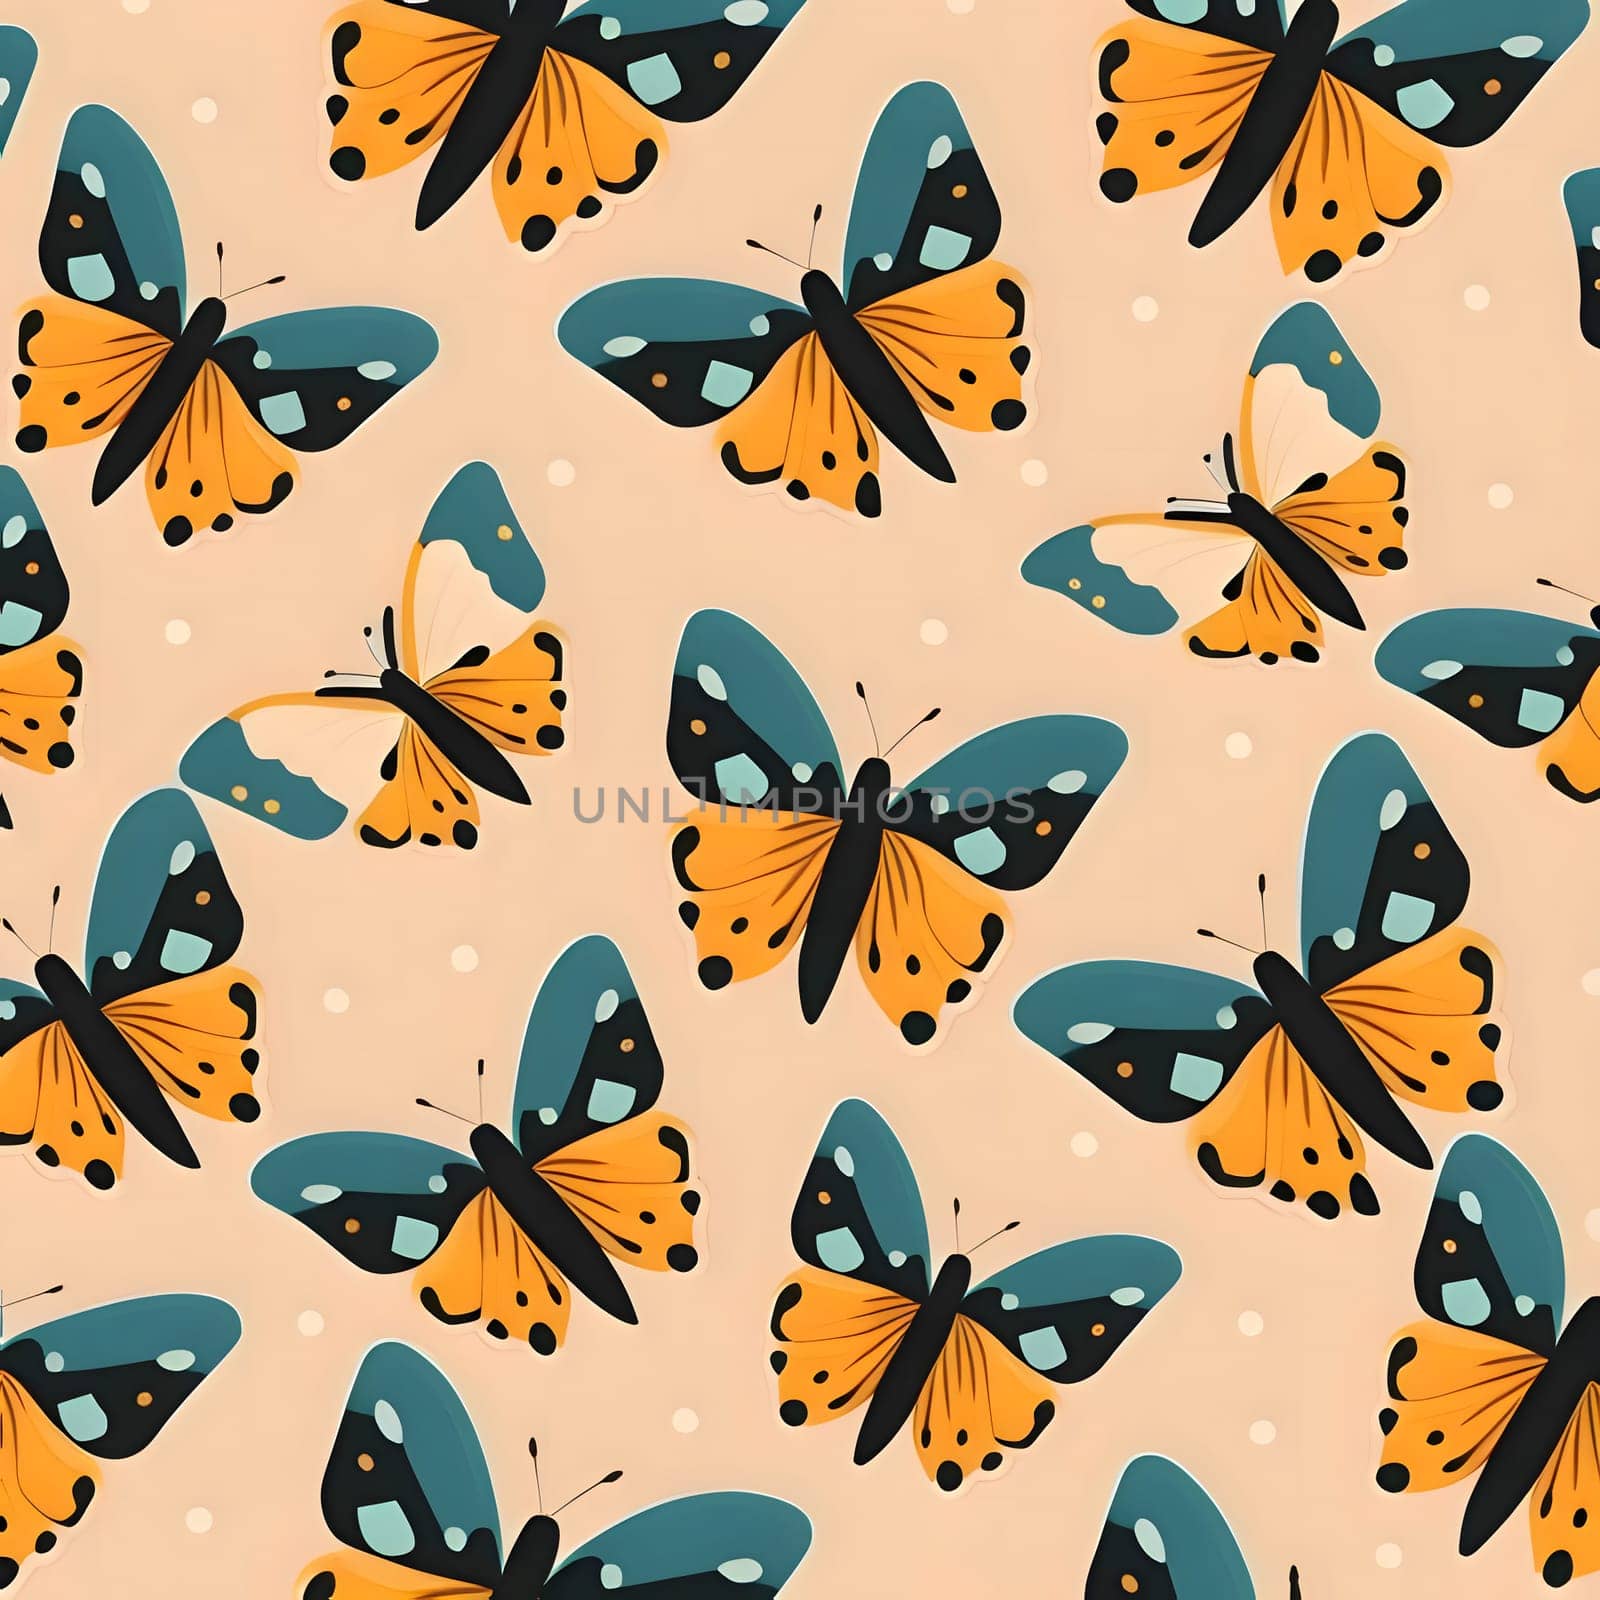 Patterns and banners backgrounds: Seamless pattern with butterflies. Vector illustration in flat style.